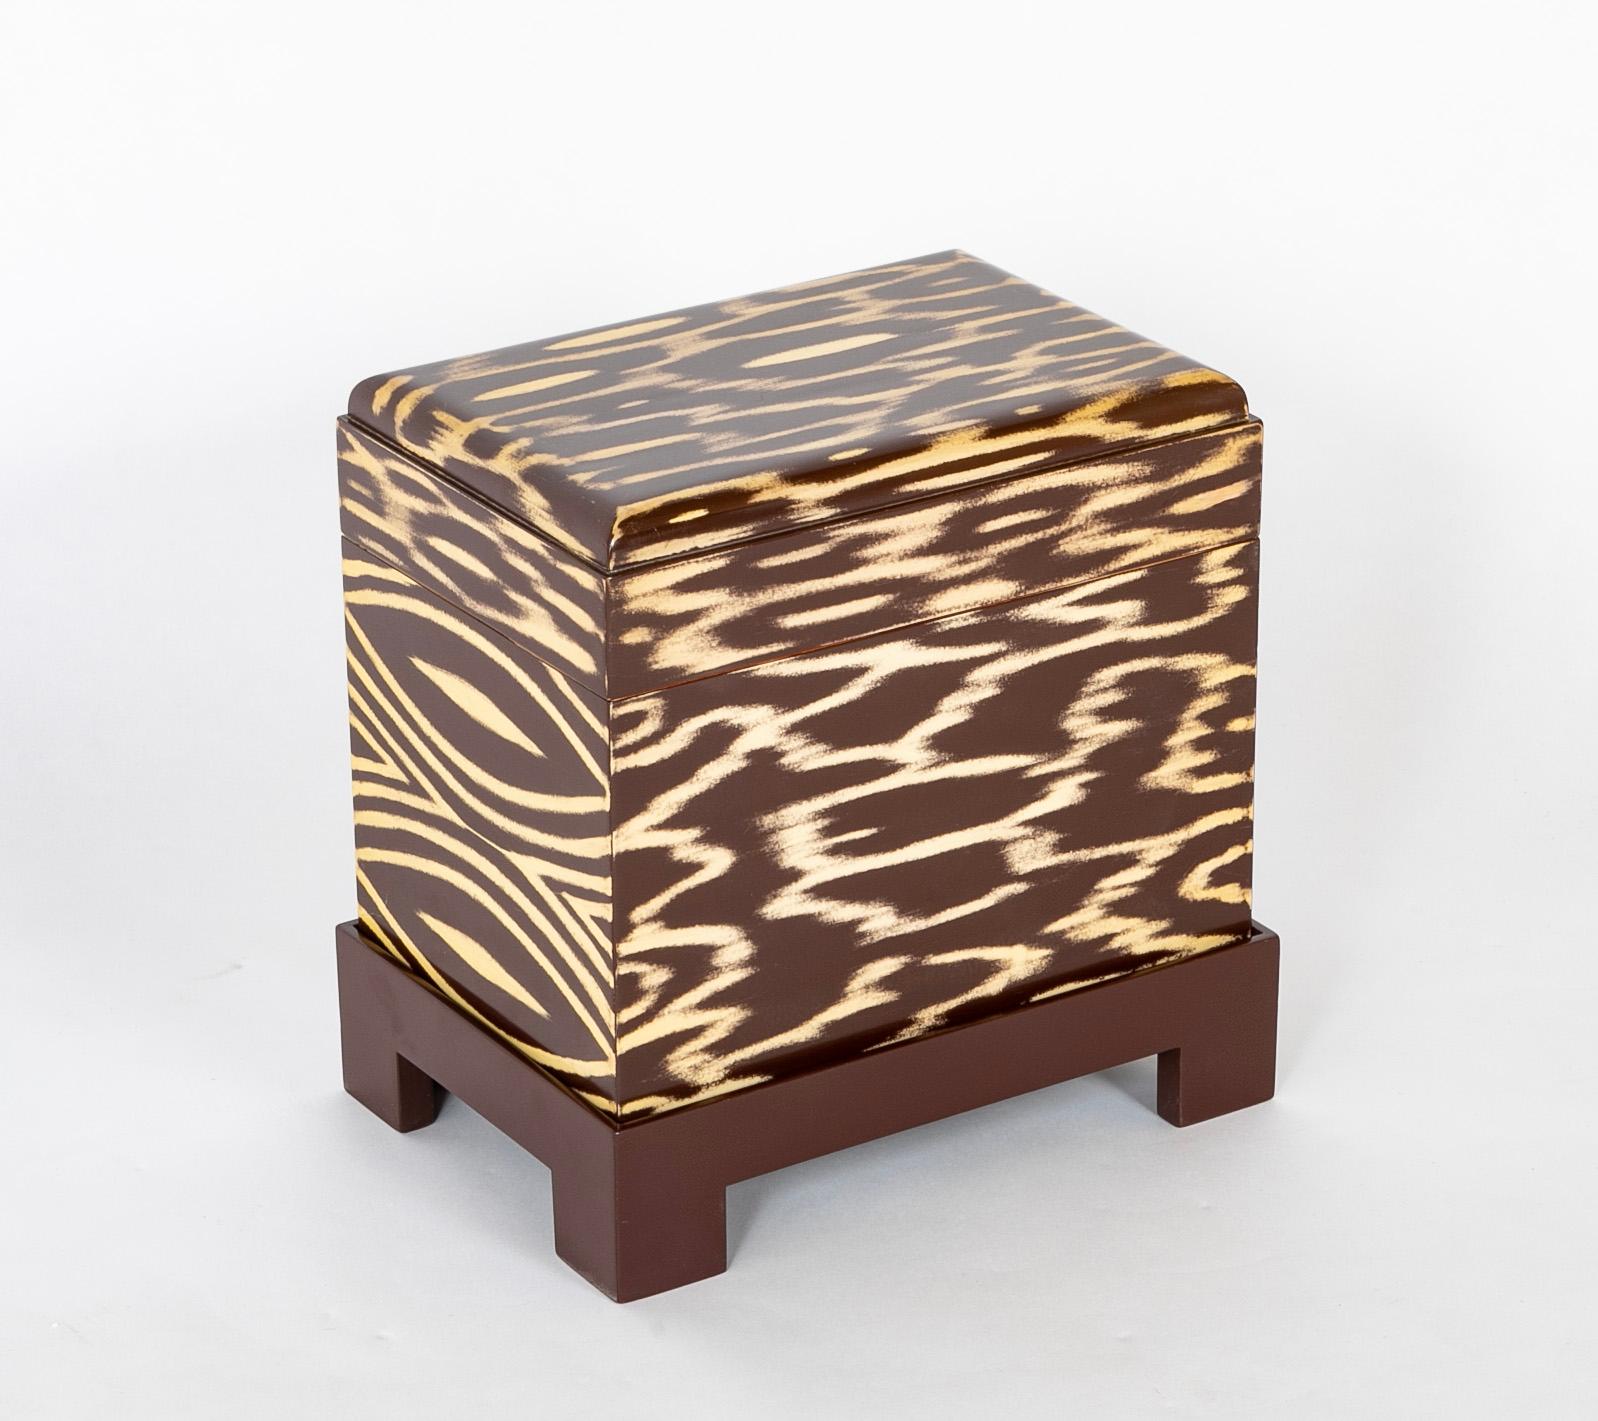  The Kyoto Box on stand is a striking example of Karl Springers lacquer work.   Produced most likely at the height of production in the1980's.   A variation of this piece can be seen in the promotional material Karl Springer put out at the time. 